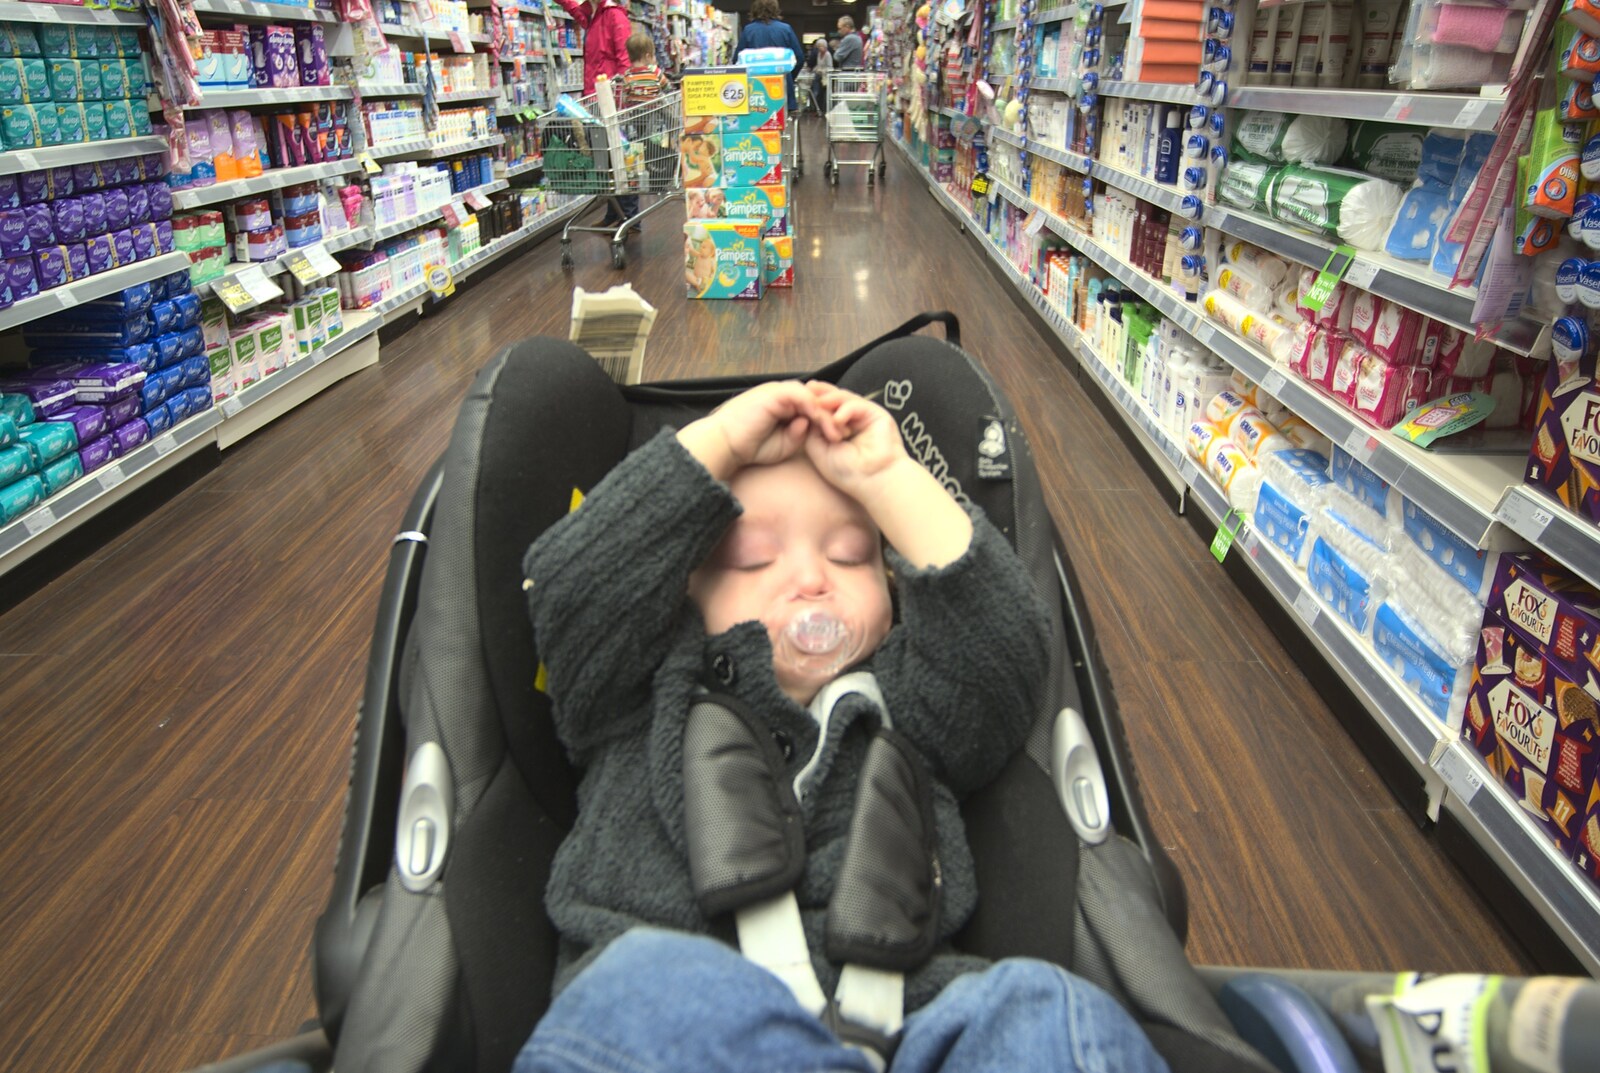 Fred tries to sleep in Superquinn supermarket from A Trip to Evelyn and Louise's, Monkstown Farm, County Dublin, Ireland - October 25th 2009